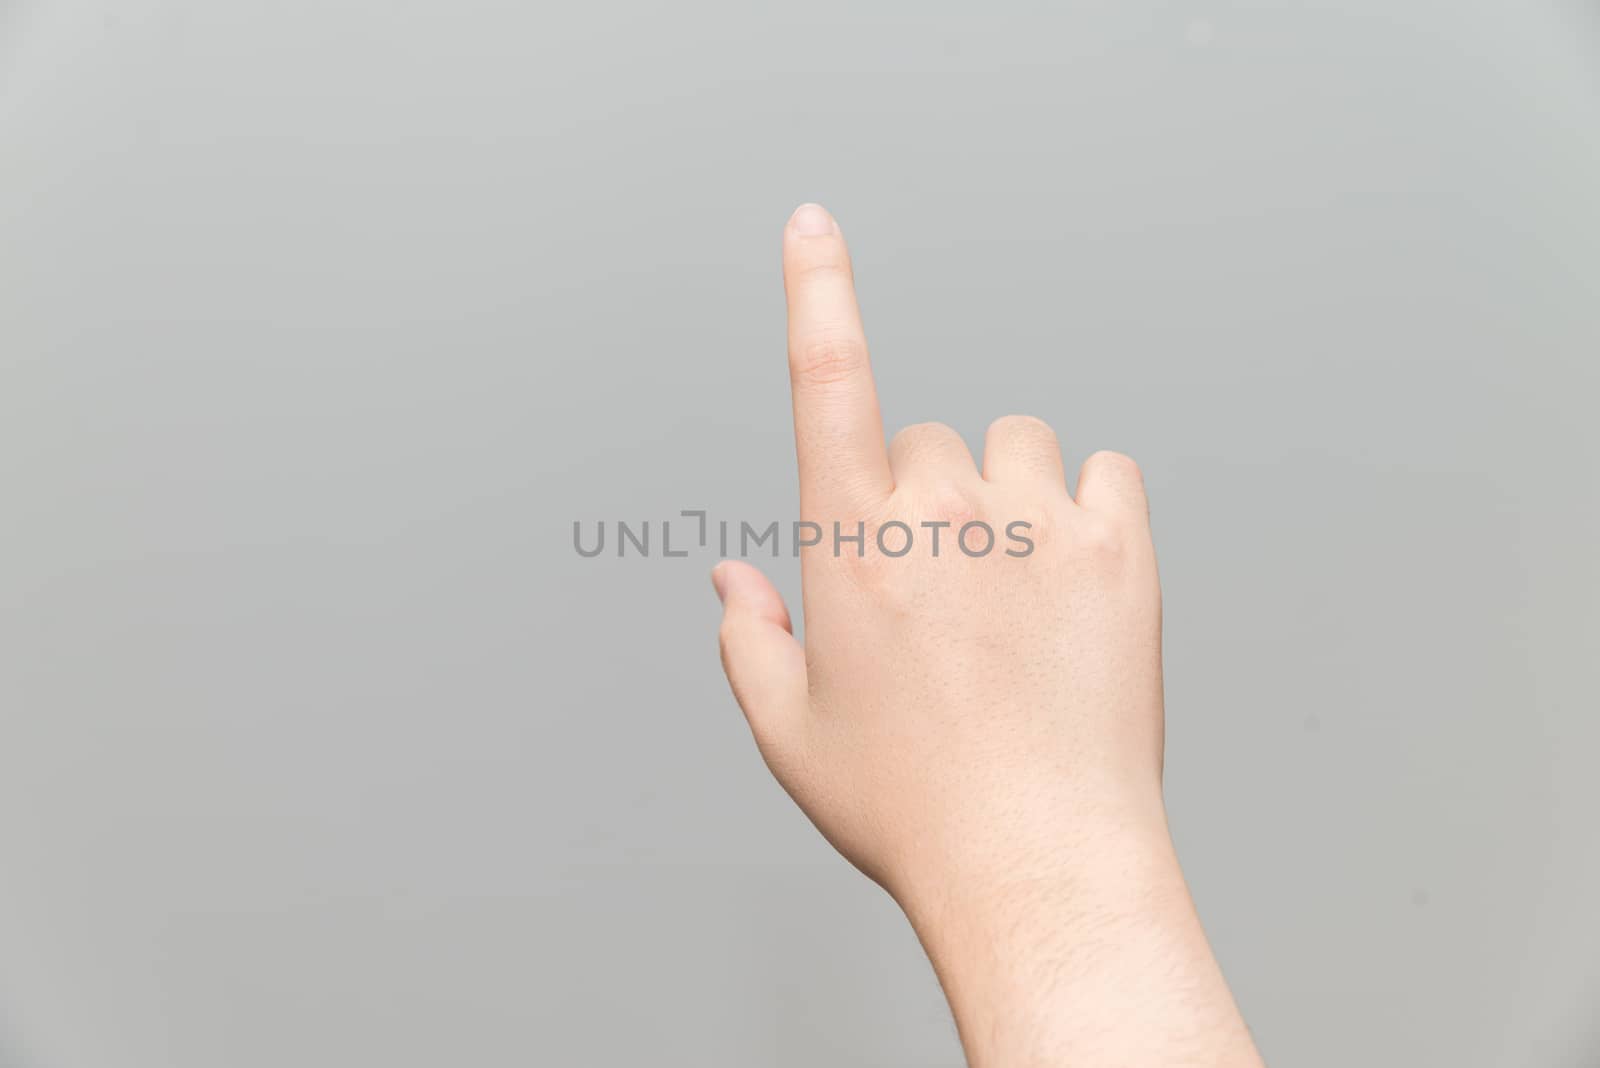 Human hand with one finger touching imaginary tablet on gray background